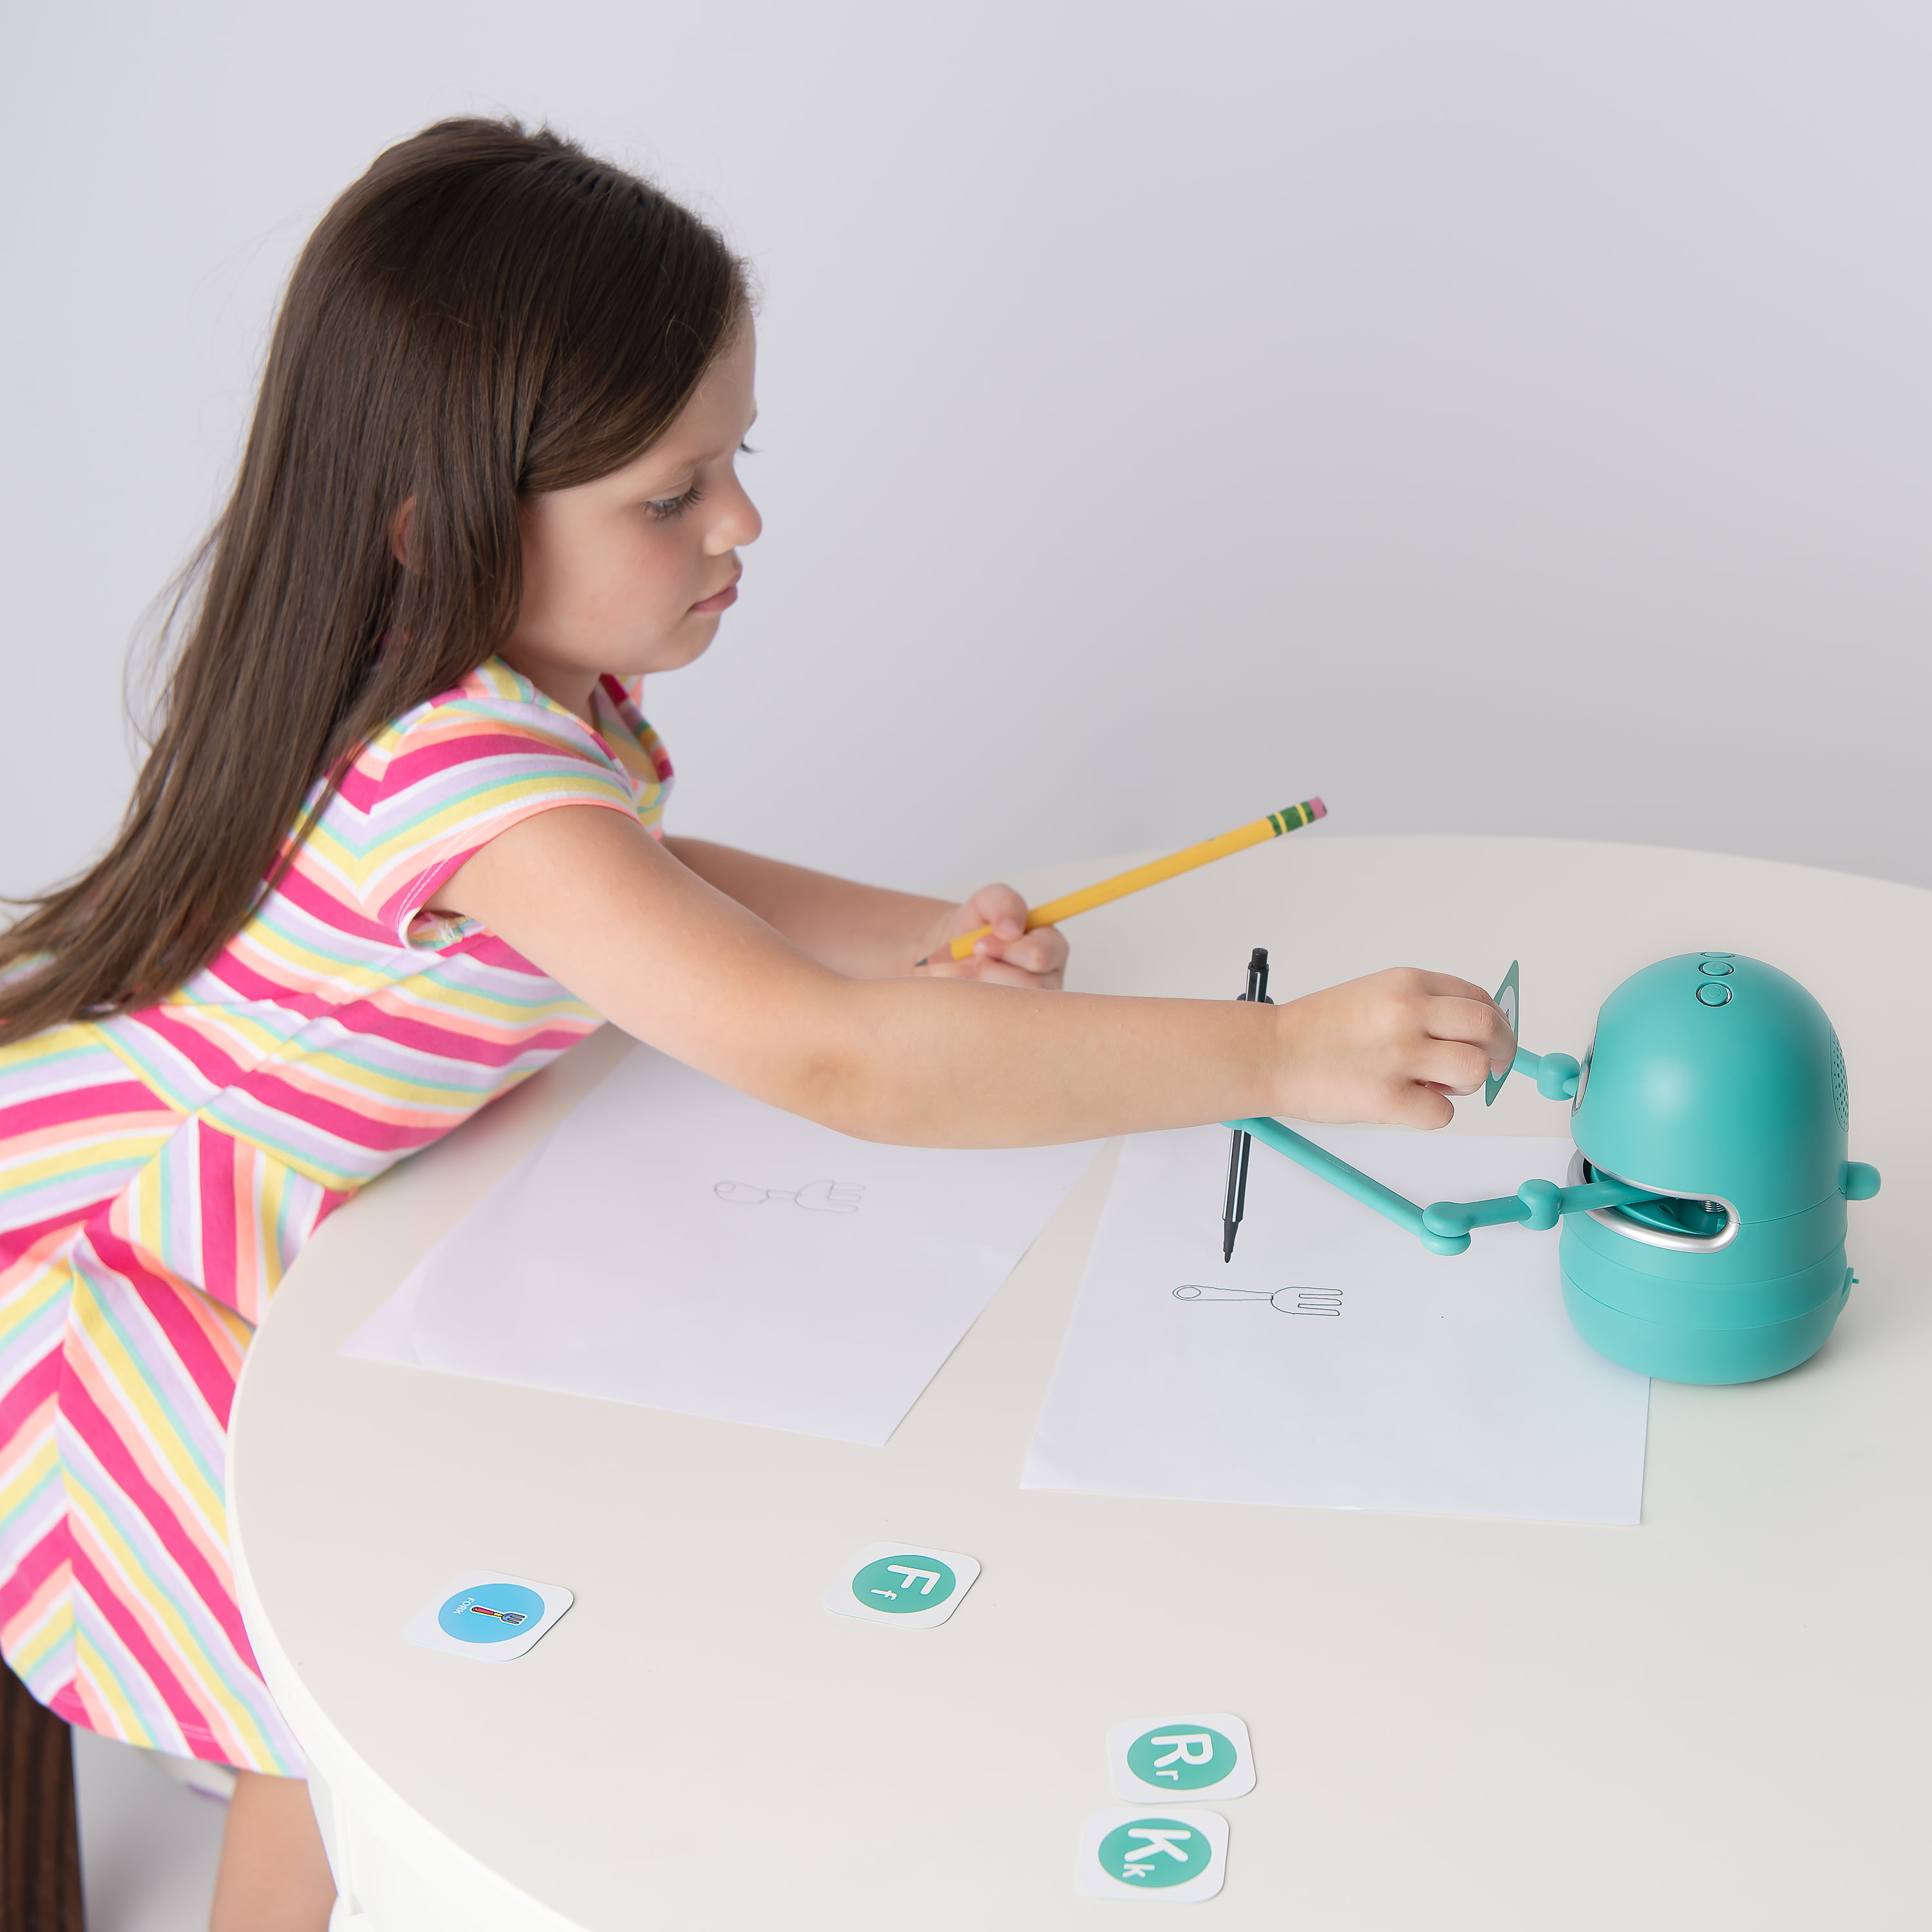 Quincy the Robot Artist Educational Toy Review - Ottawa Mommy Club